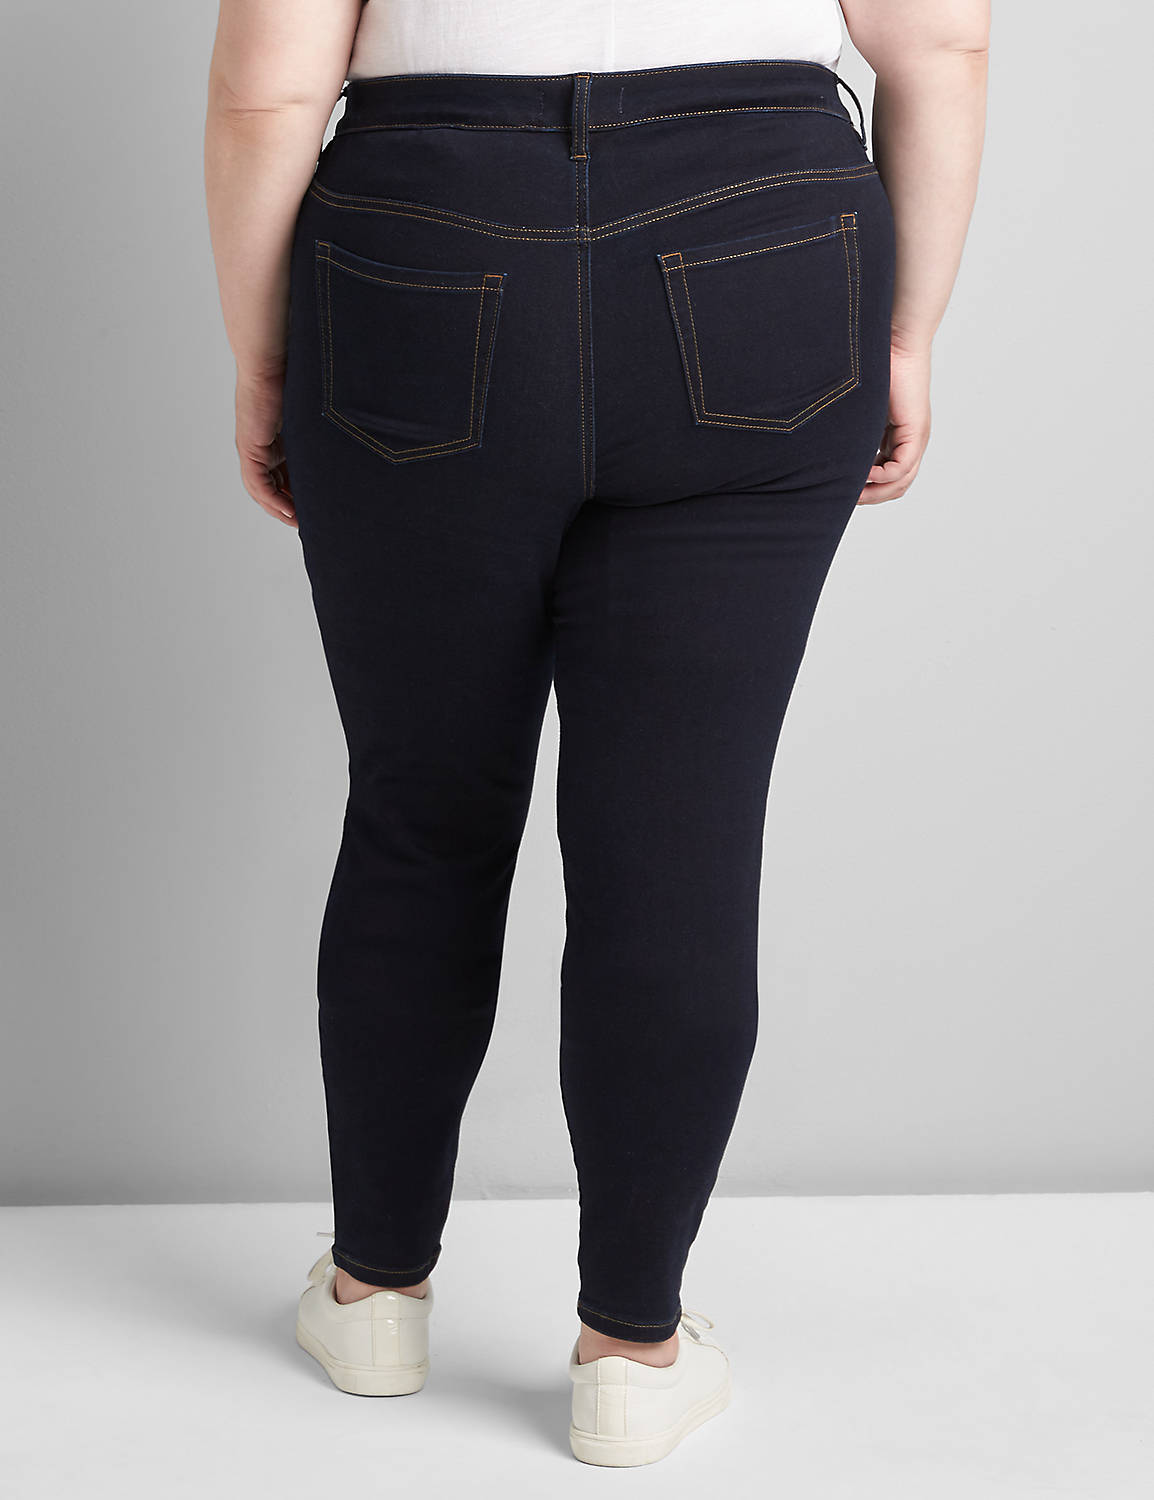 STRAIGHT FIT HIGH RISE SKINNY- RINS Product Image 2